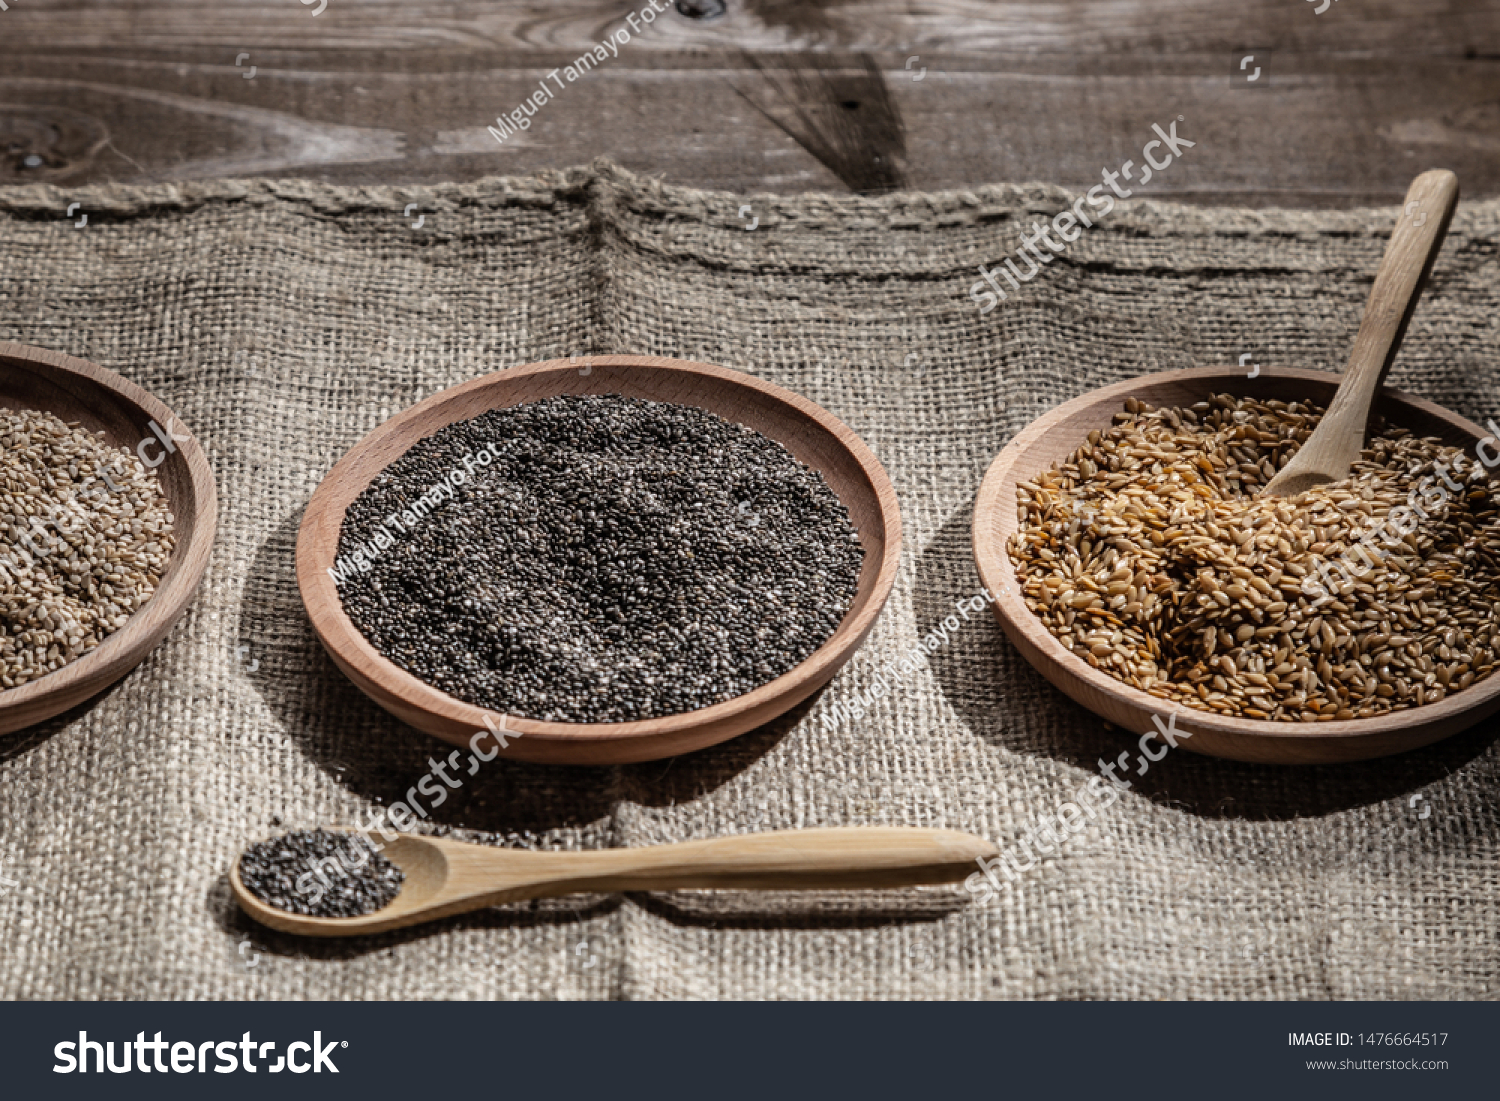 Sesame, chia and flax seeds in wooden dishes, wooden spoon with chia on wooden base.  #1476664517